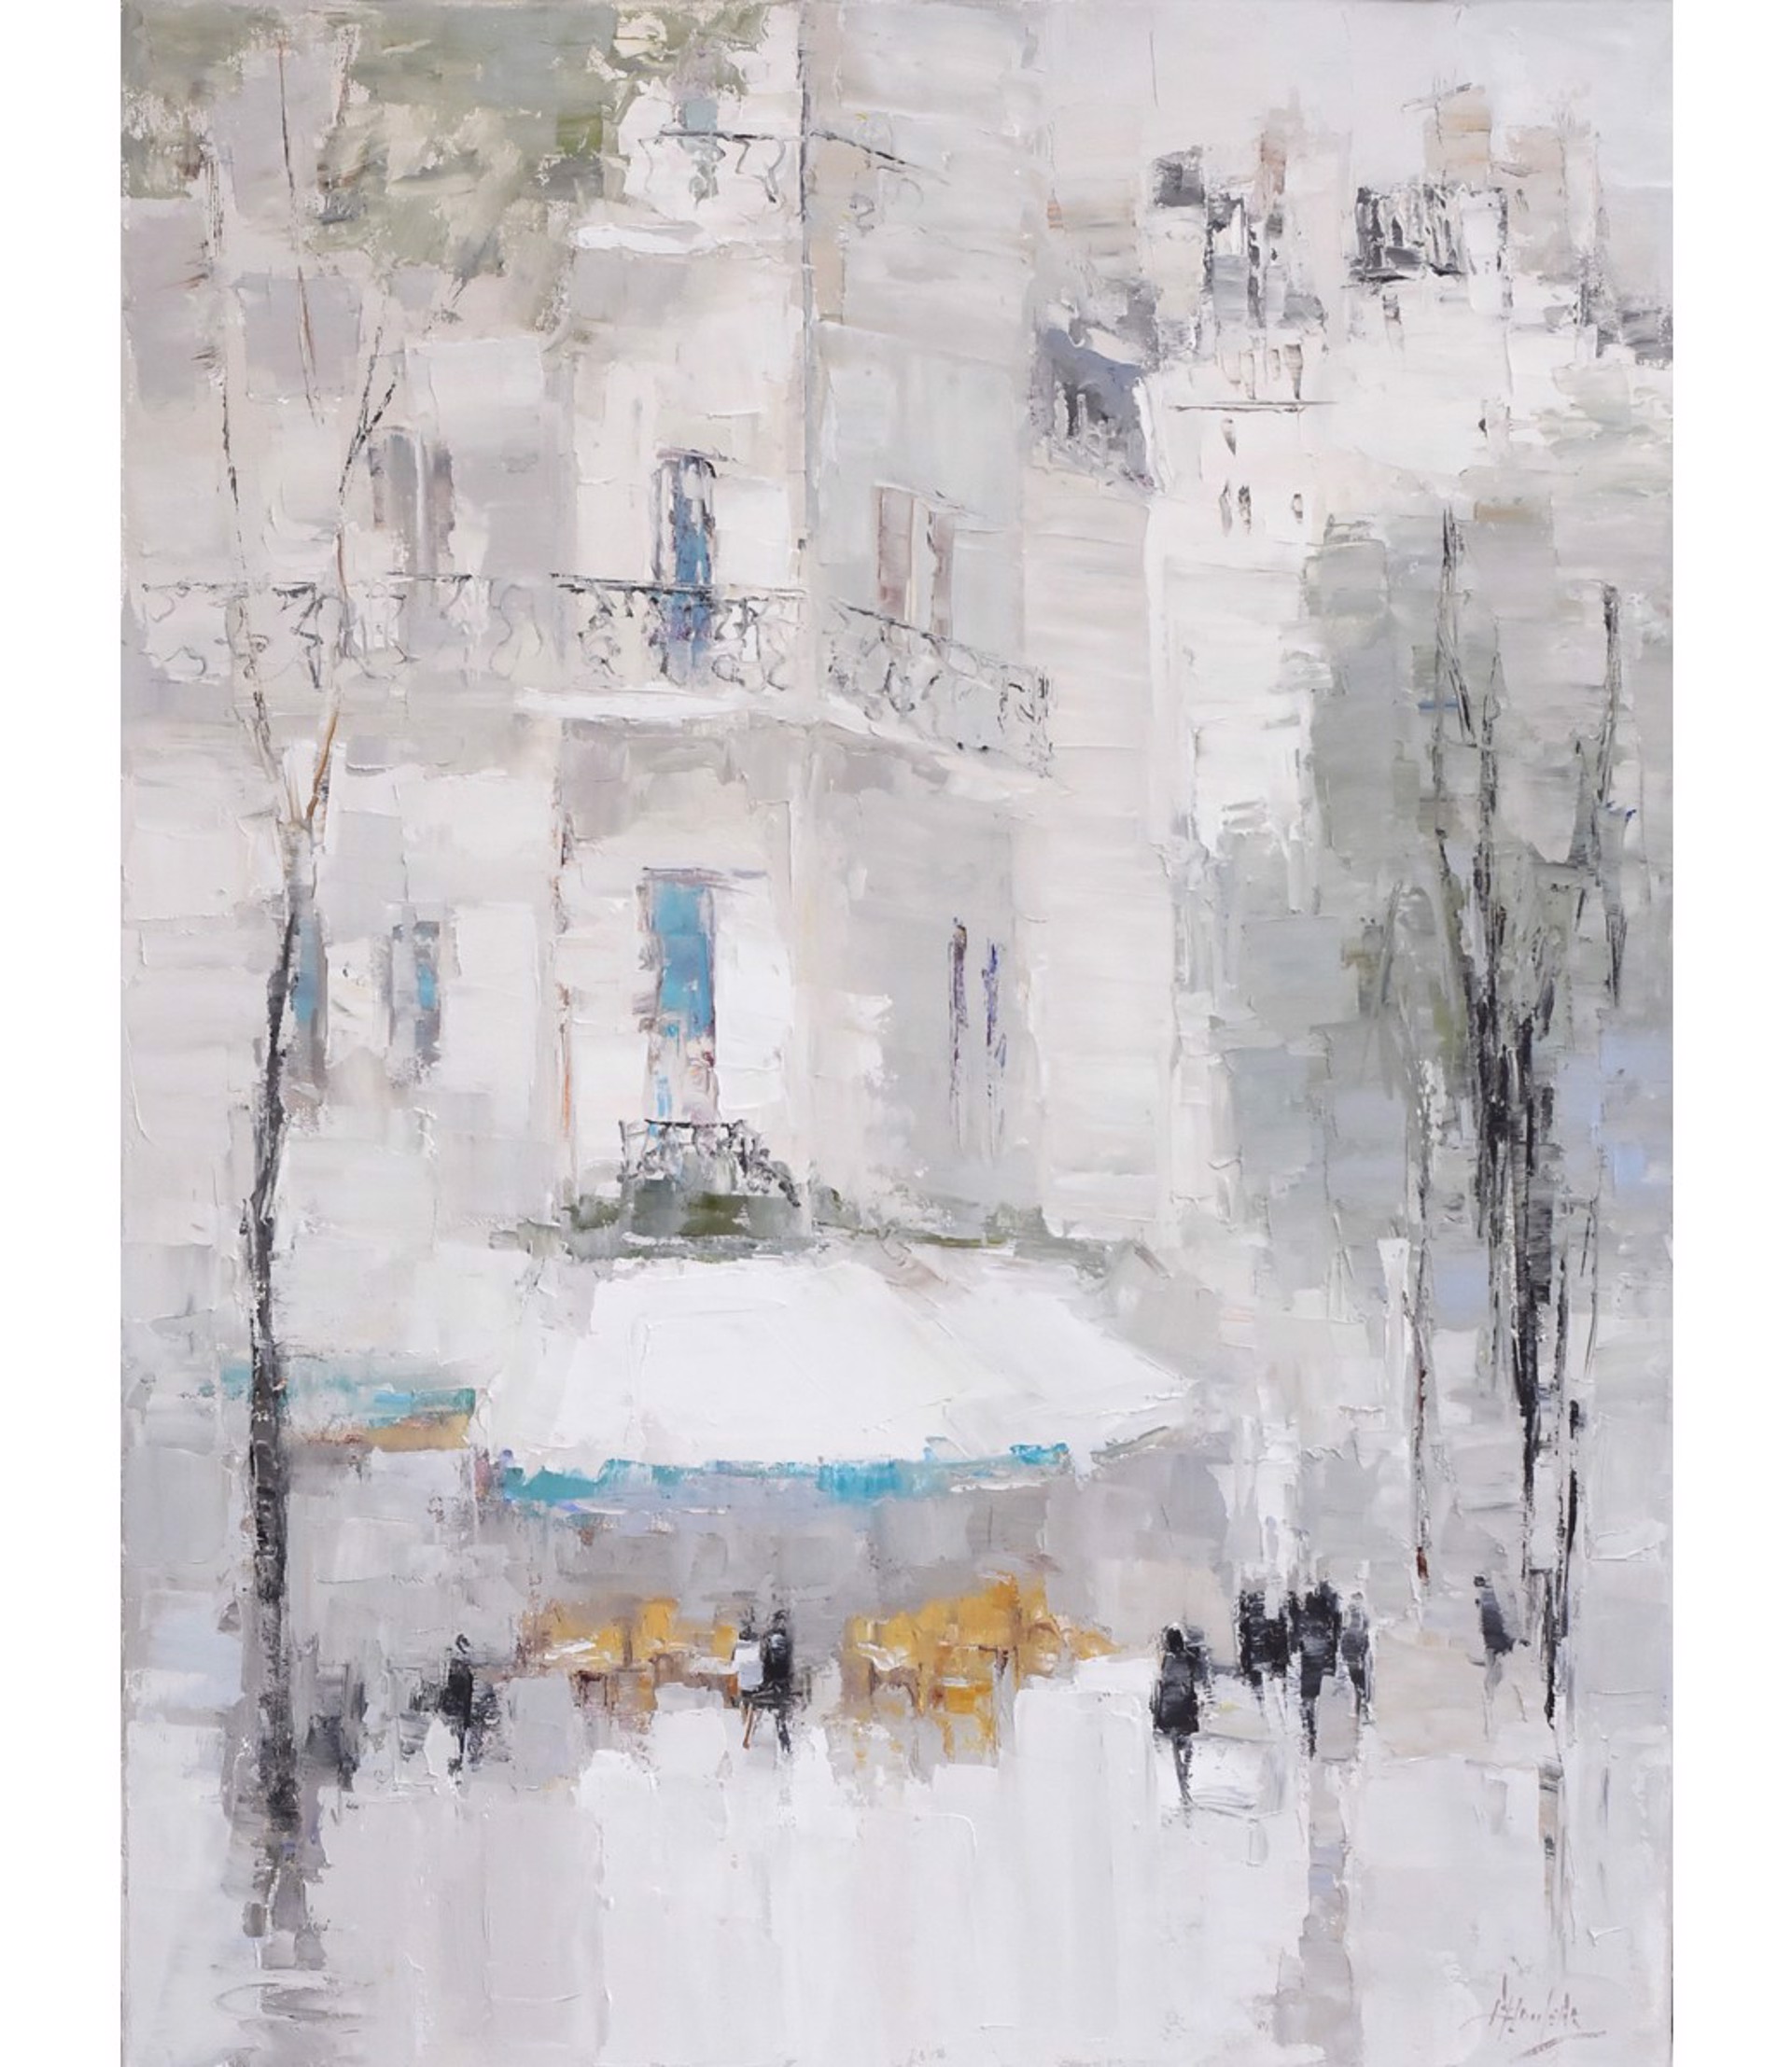 Les Deux Magots- SOLD by Barbara Flowers